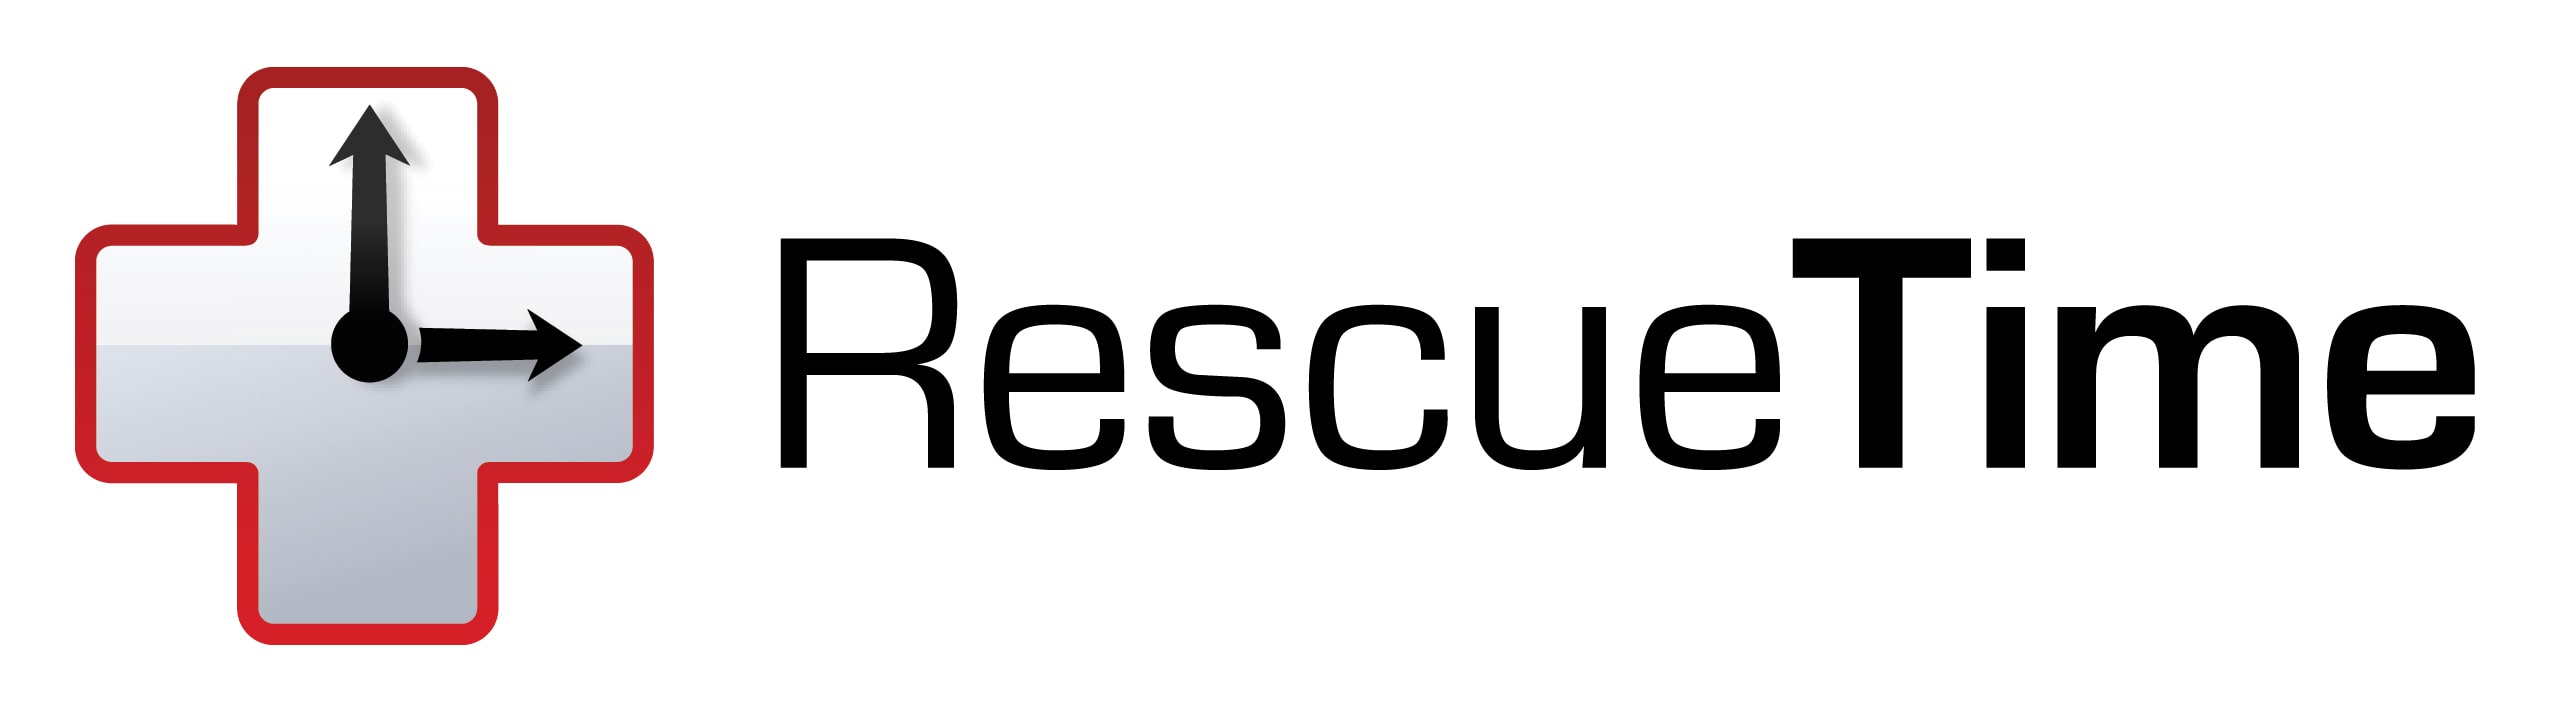 rescue time application time management